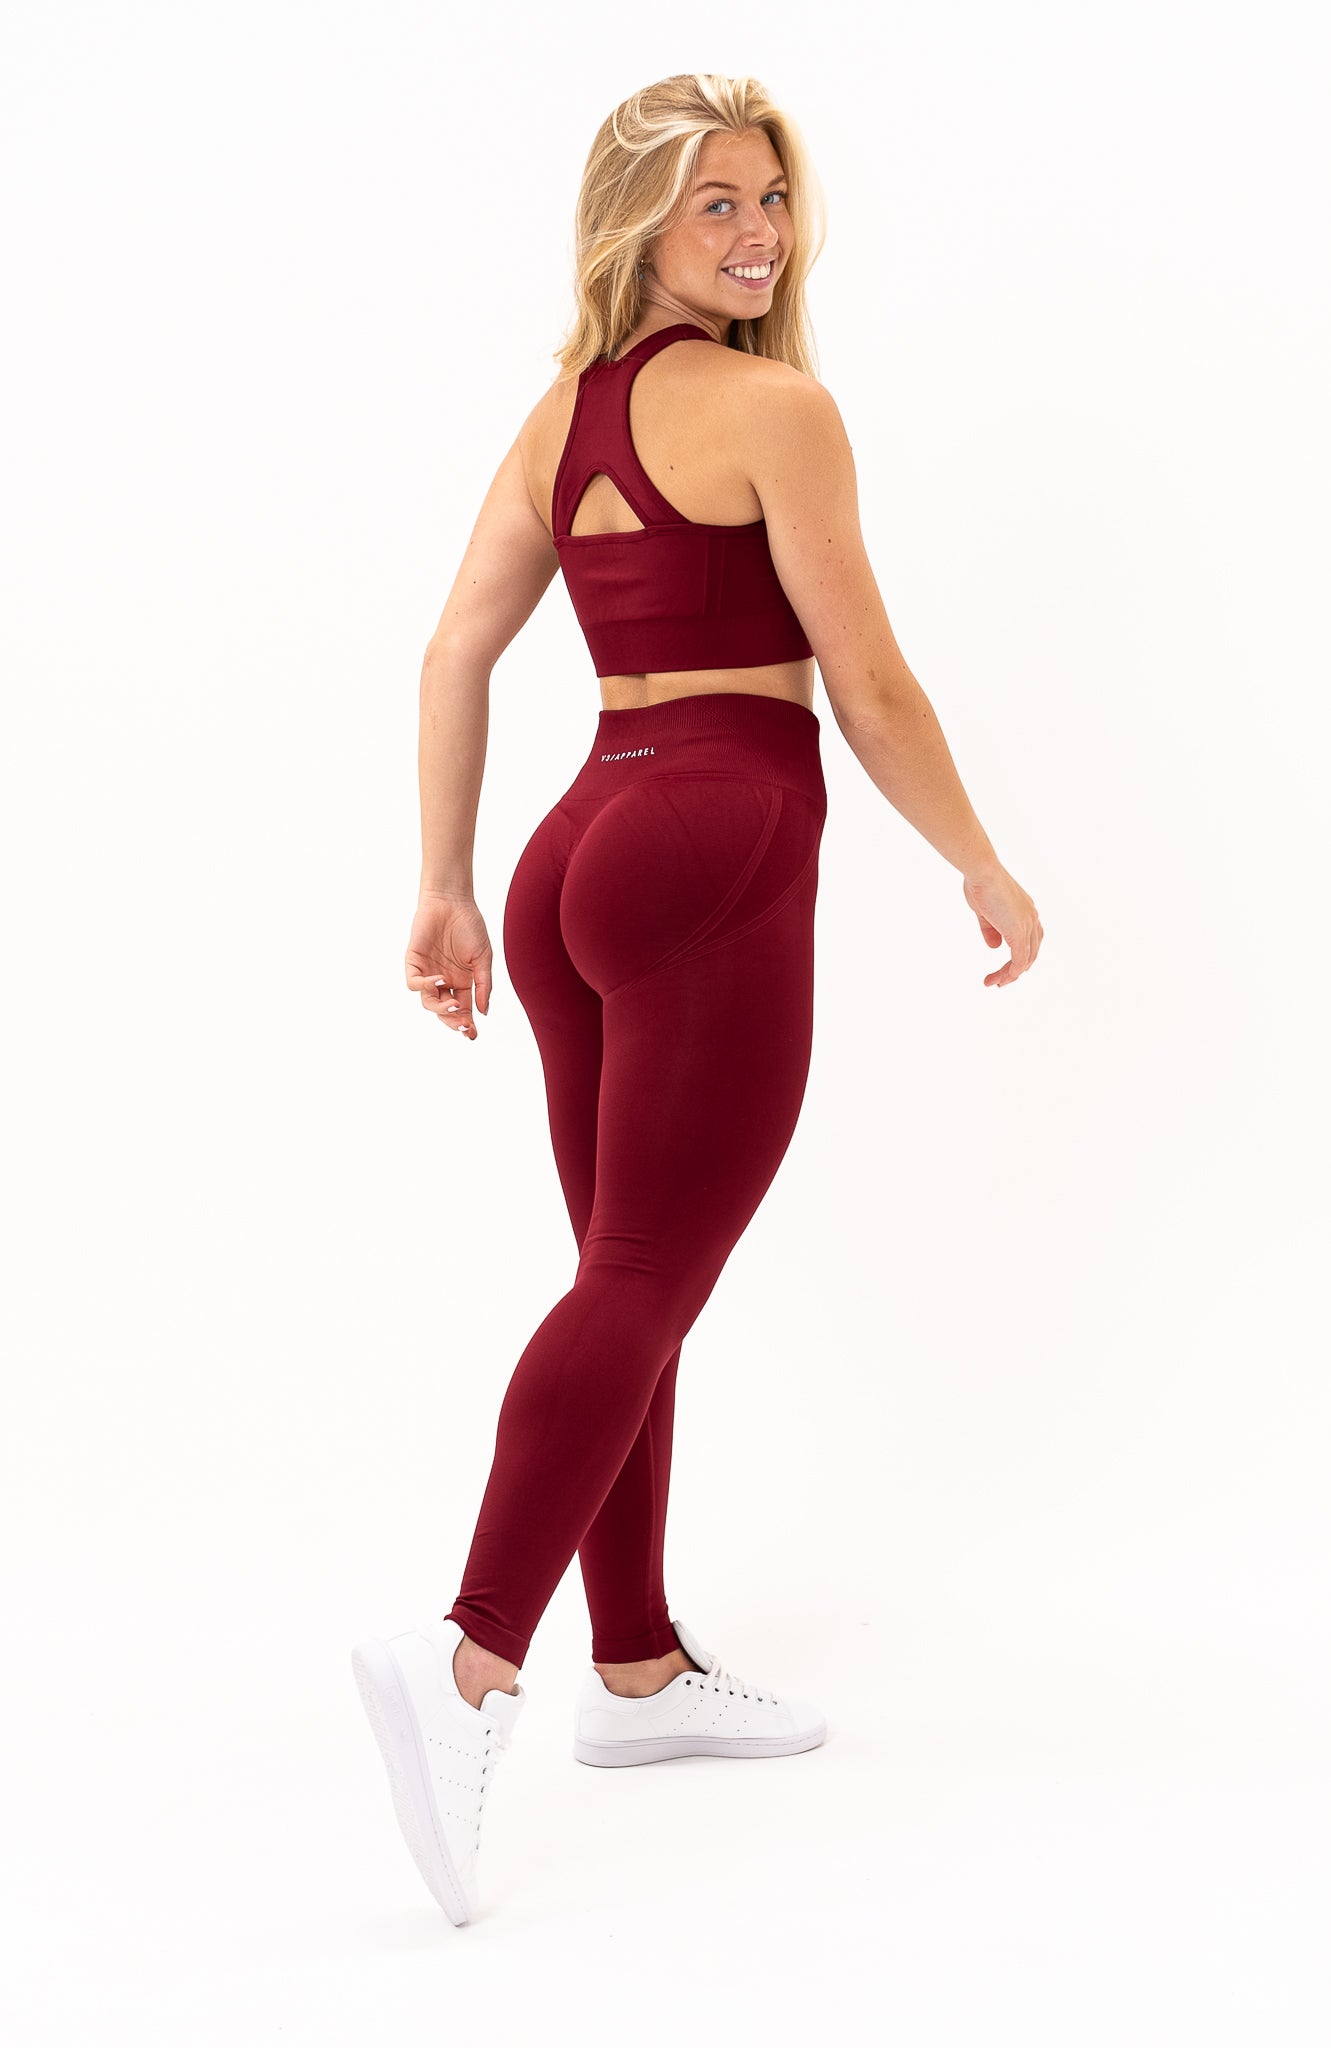 V3 Apparel Womens 2-Piece Tempo Seamless Scrunch Workout Outfit - Burgundy  Red - Gym Workout Leggings & Fitness Sports Bra